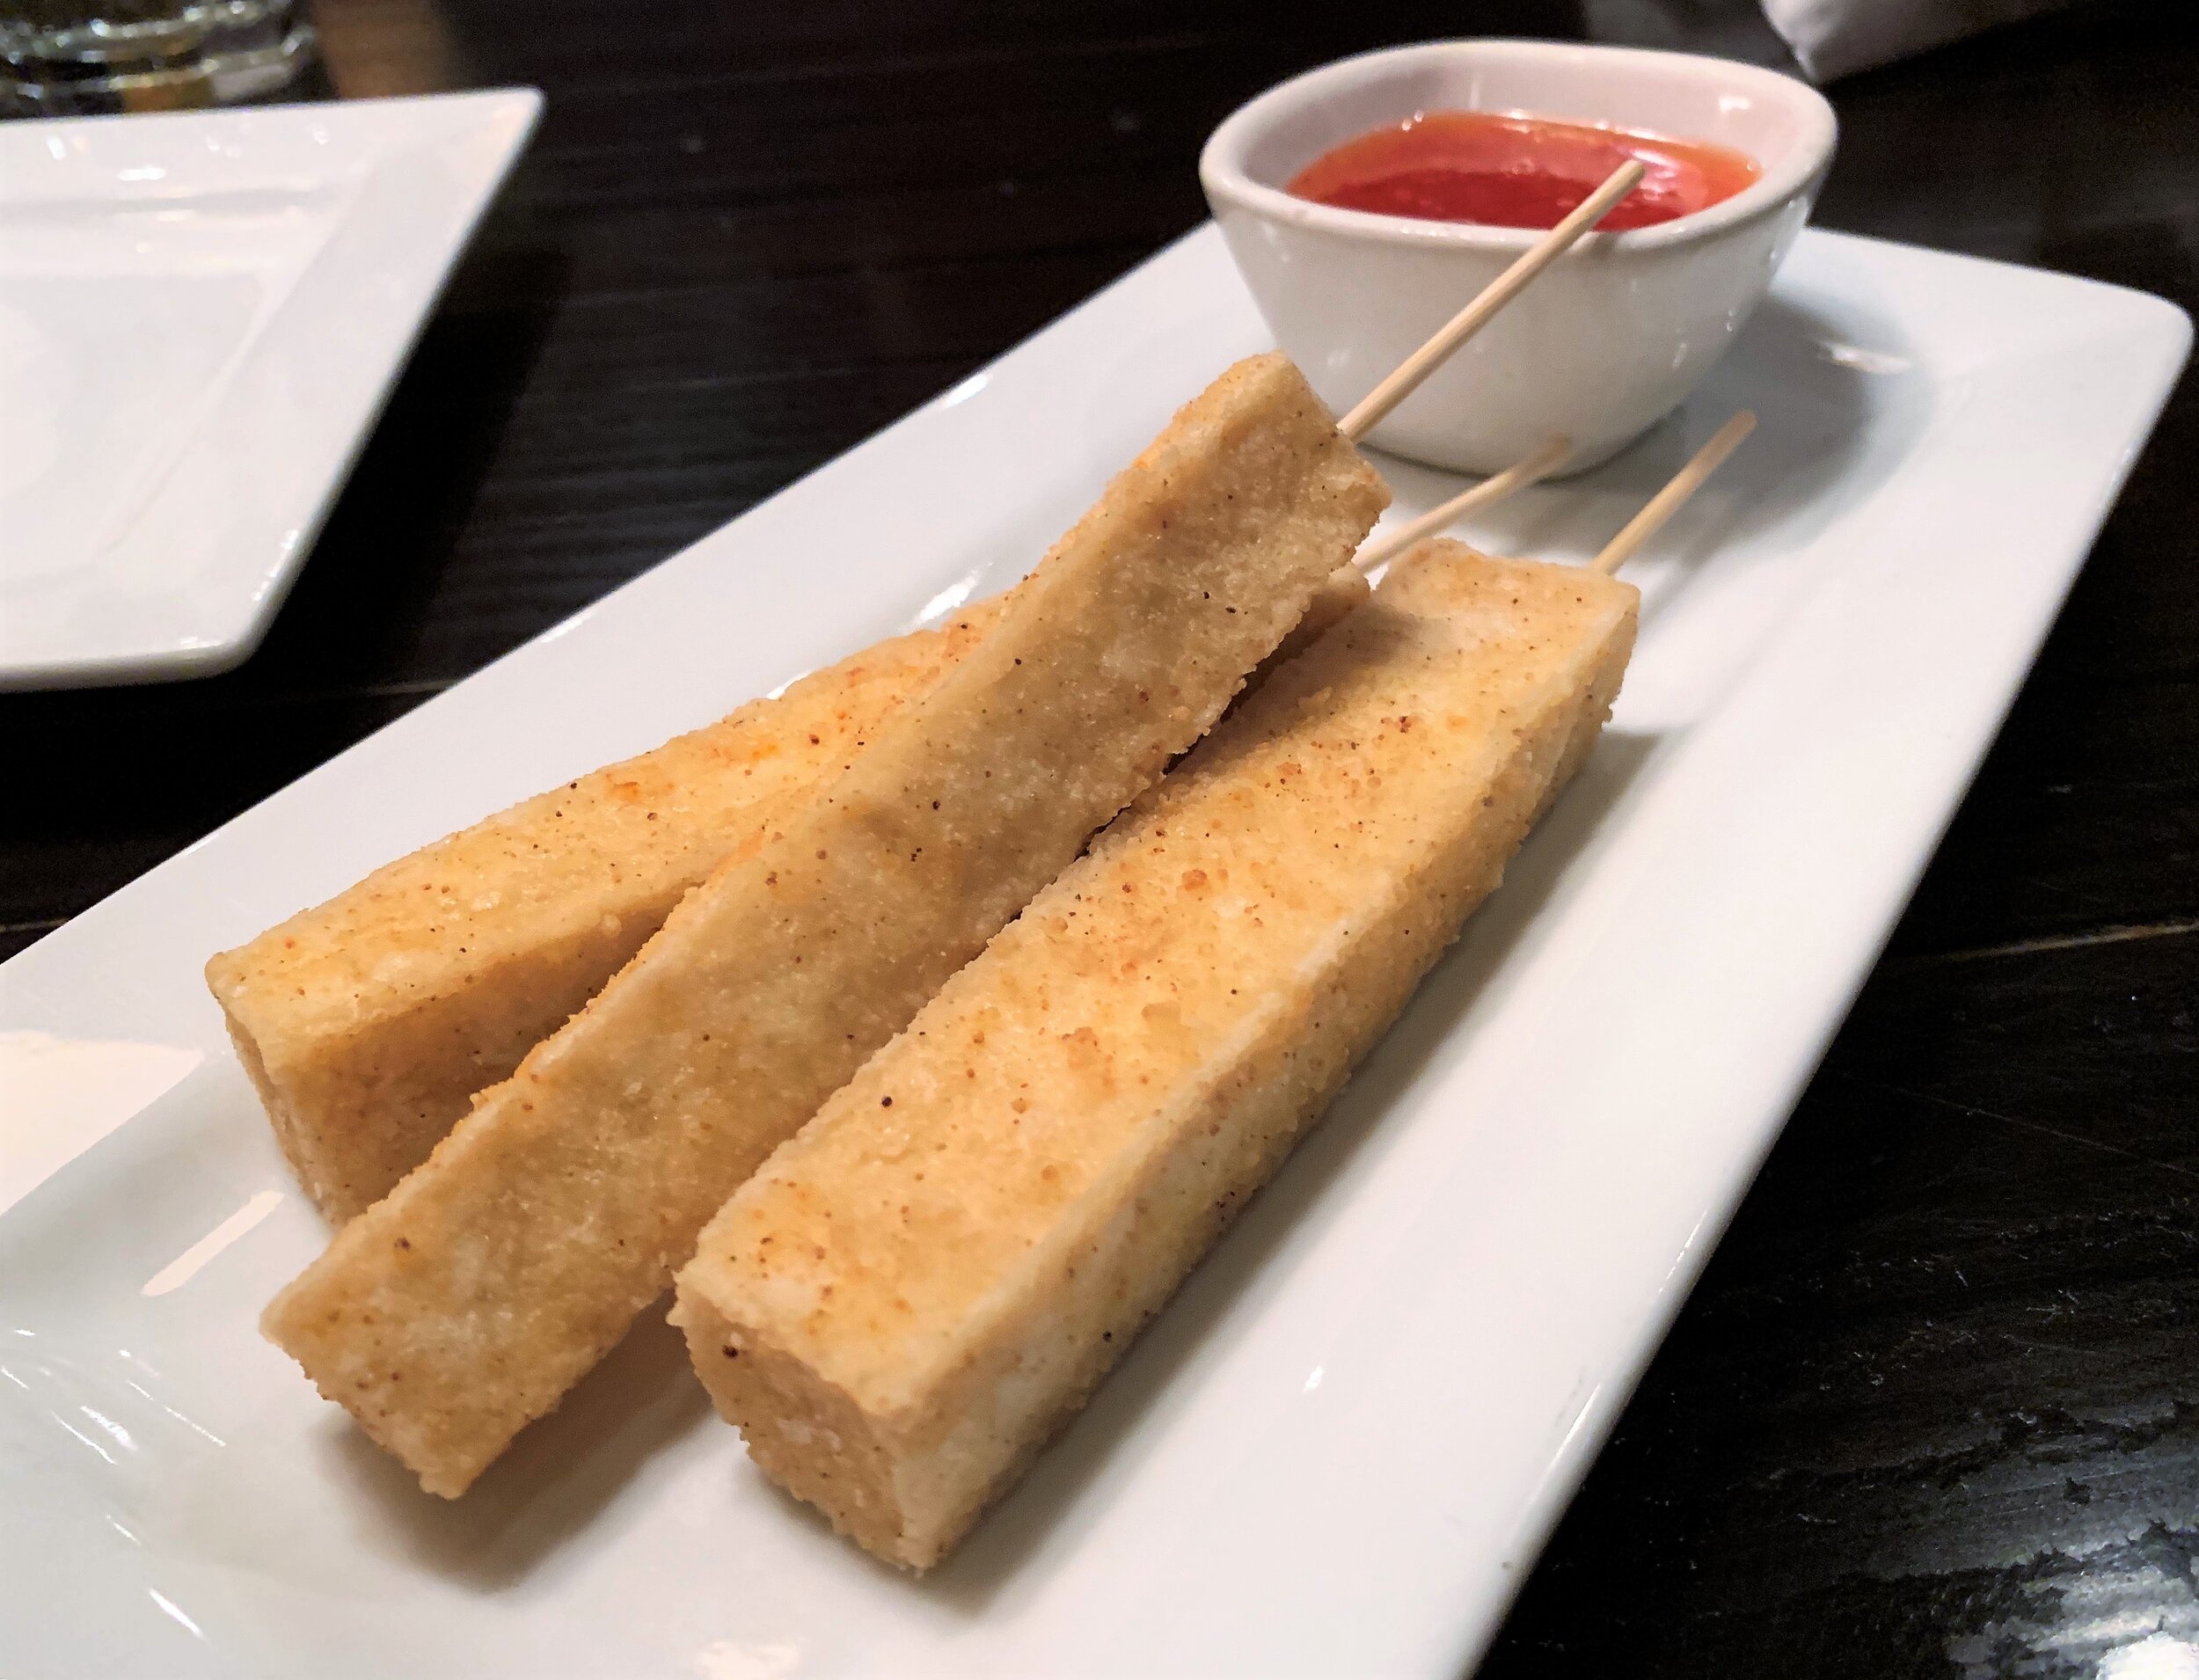 Three sticks of fried tofu with sweet chili sauce at Ginger Hop in northeast Minneapolis